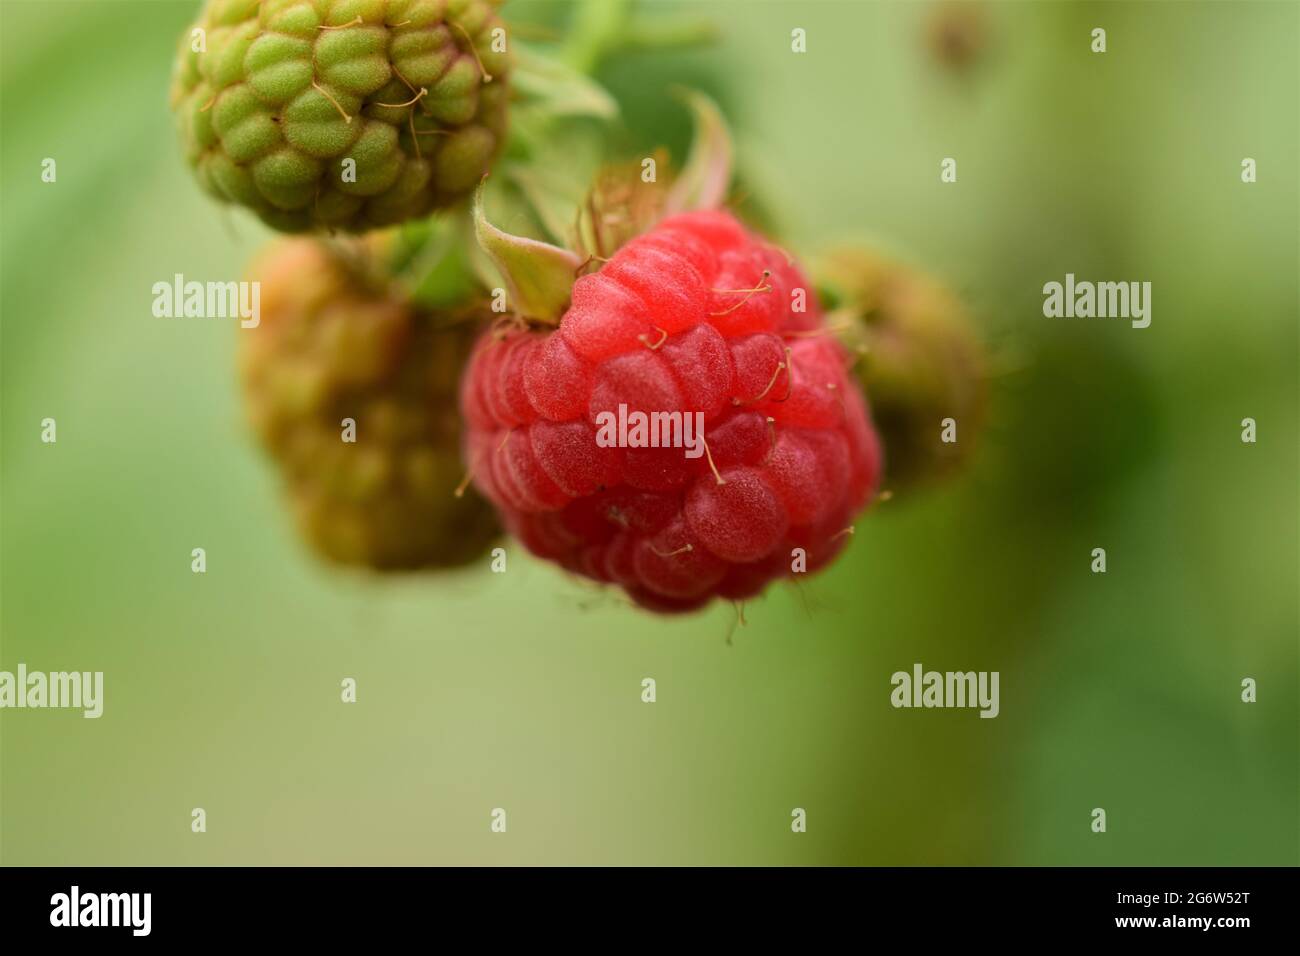 Unripe green and ripe red raspberries as a close up against a blurred background Stock Photo